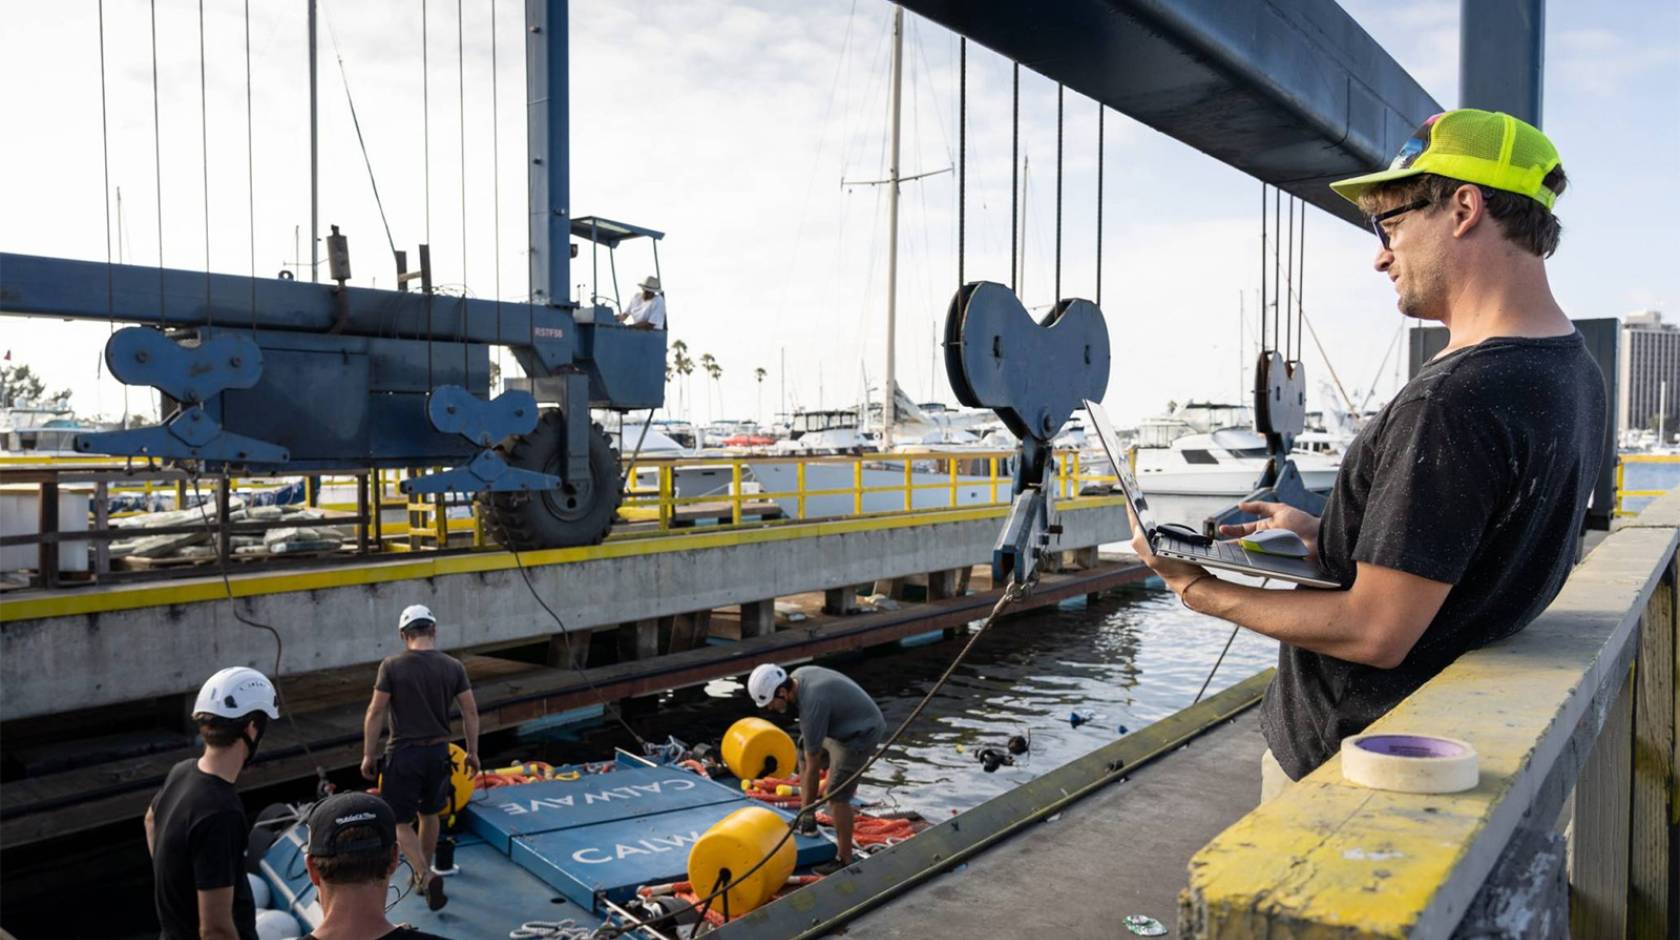 People in hard hats work under a crane on a dock, with a blue, car-sized platform in the middle of the frame